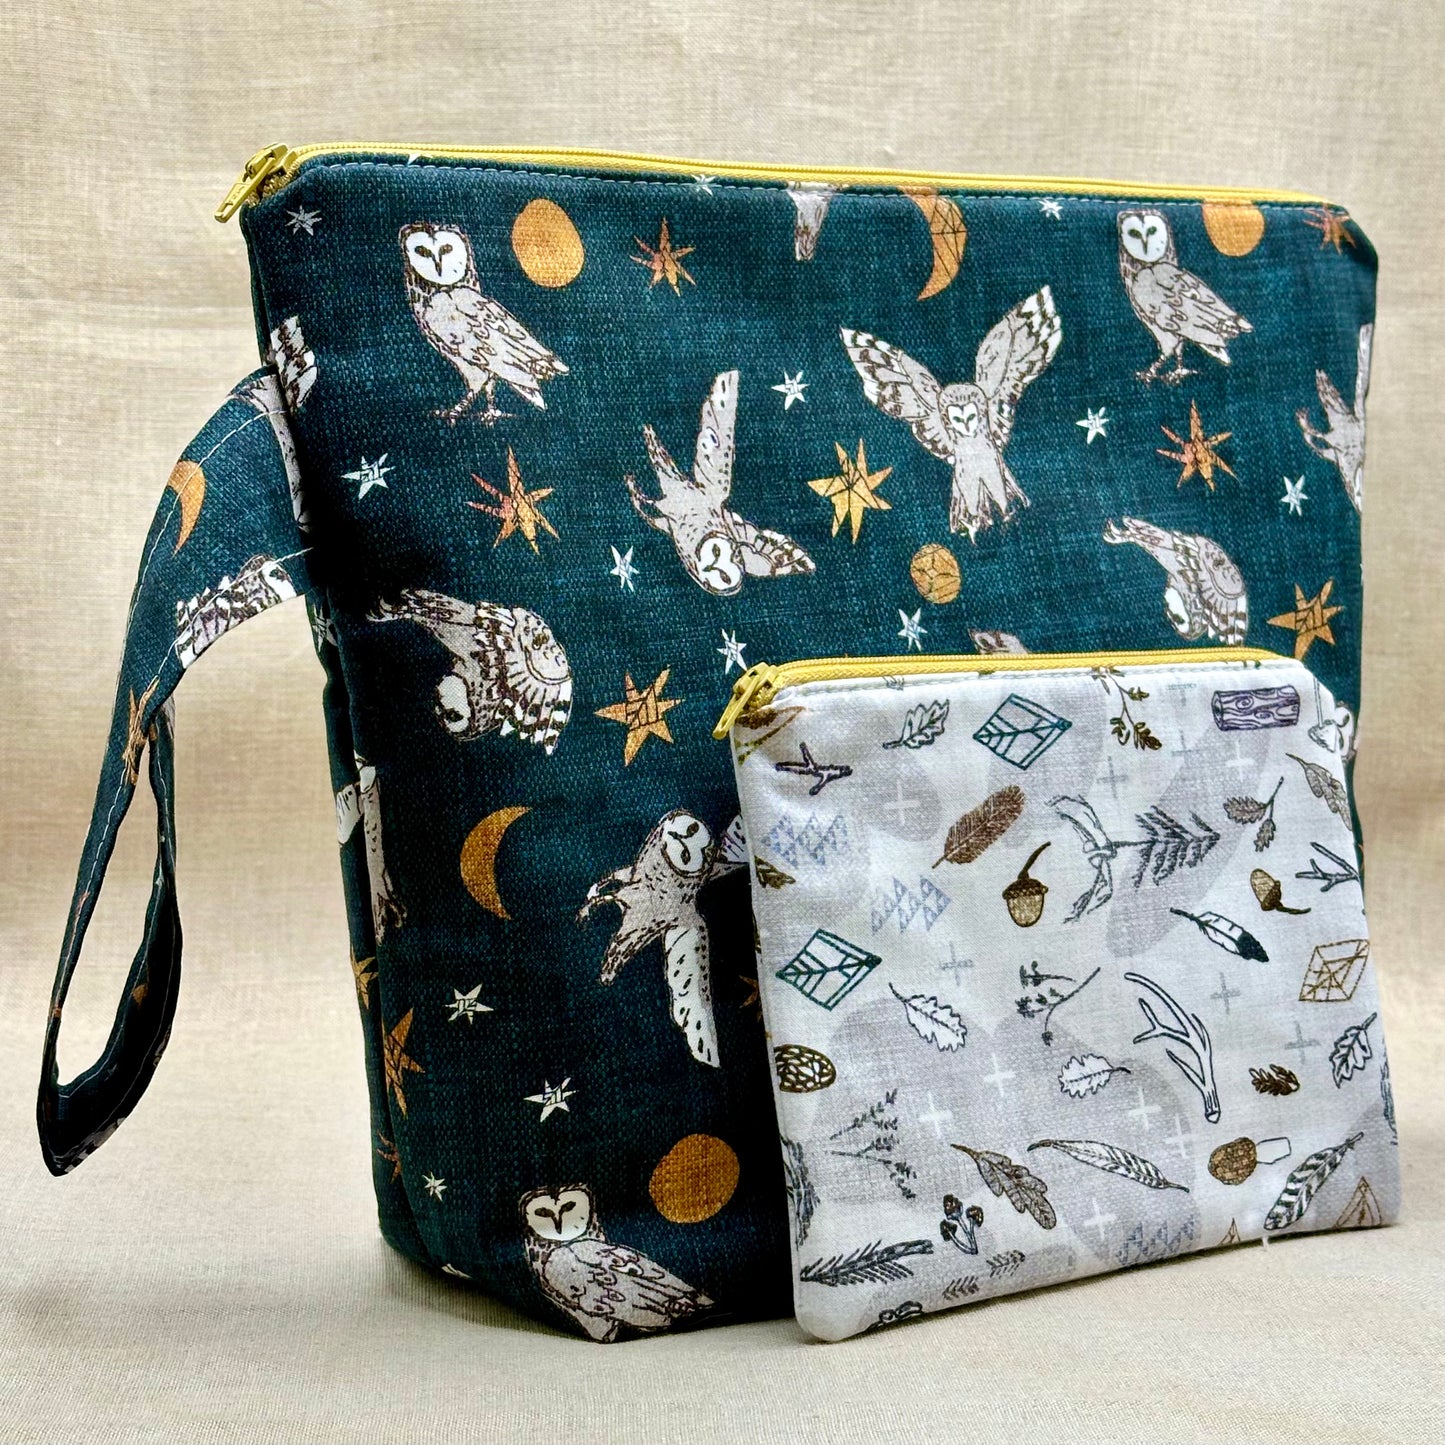 What A Hoot - Medium Wedgetote with Coordinating Notions Pouch